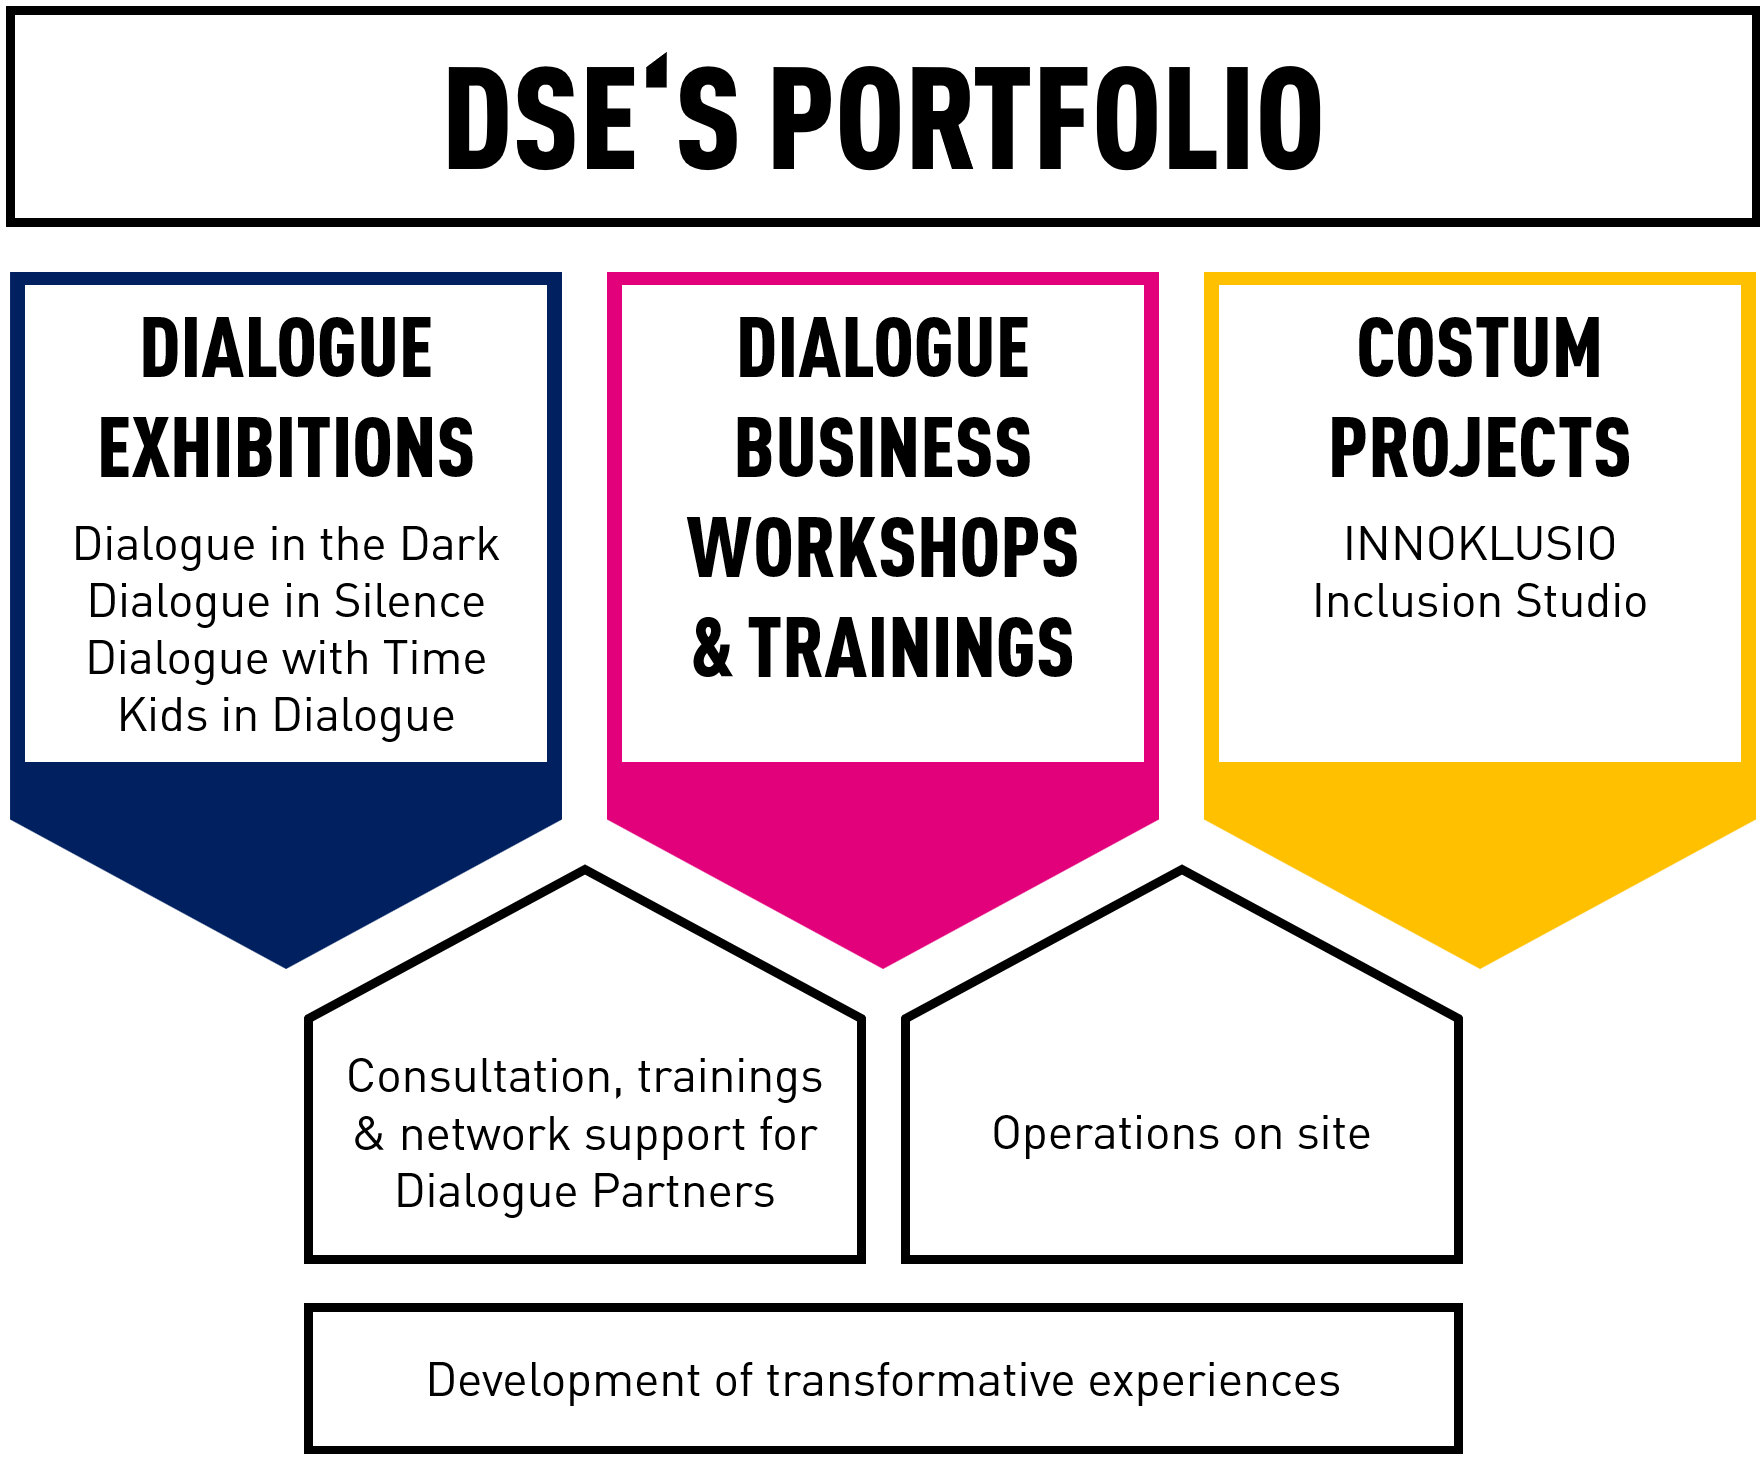 Visualization of the DSE portfolio based on Dialogue Exhibitions, Dialogue Business Workshops and Trainings as well as costum projects.